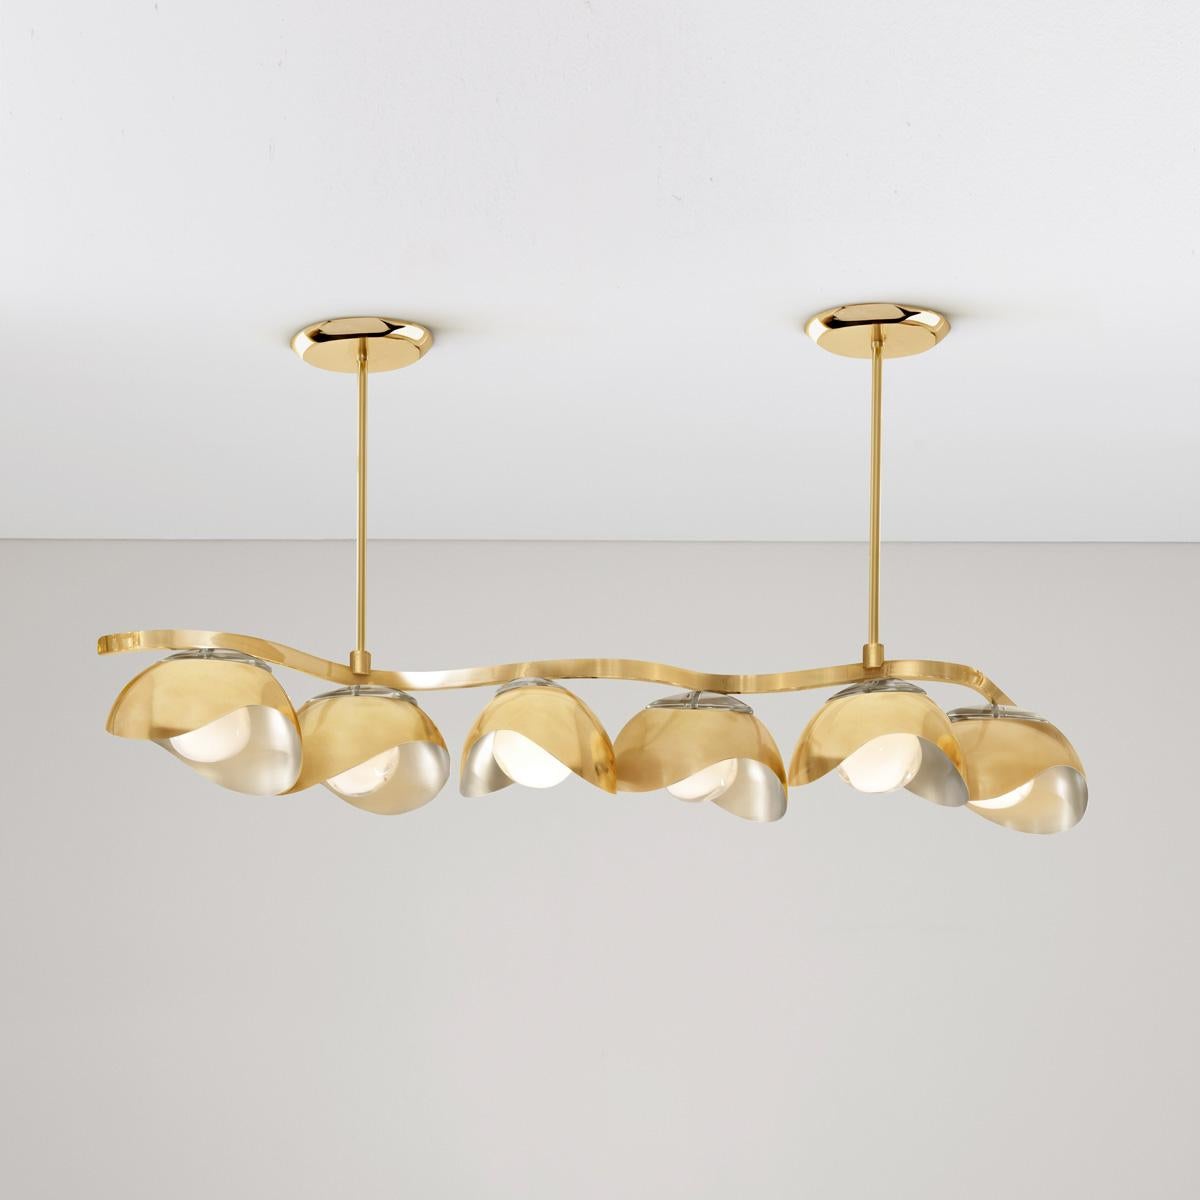 Italian Serpente Ceiling Light by Gaspare Asaro- Polished Nickel and Satin Brass Finish For Sale